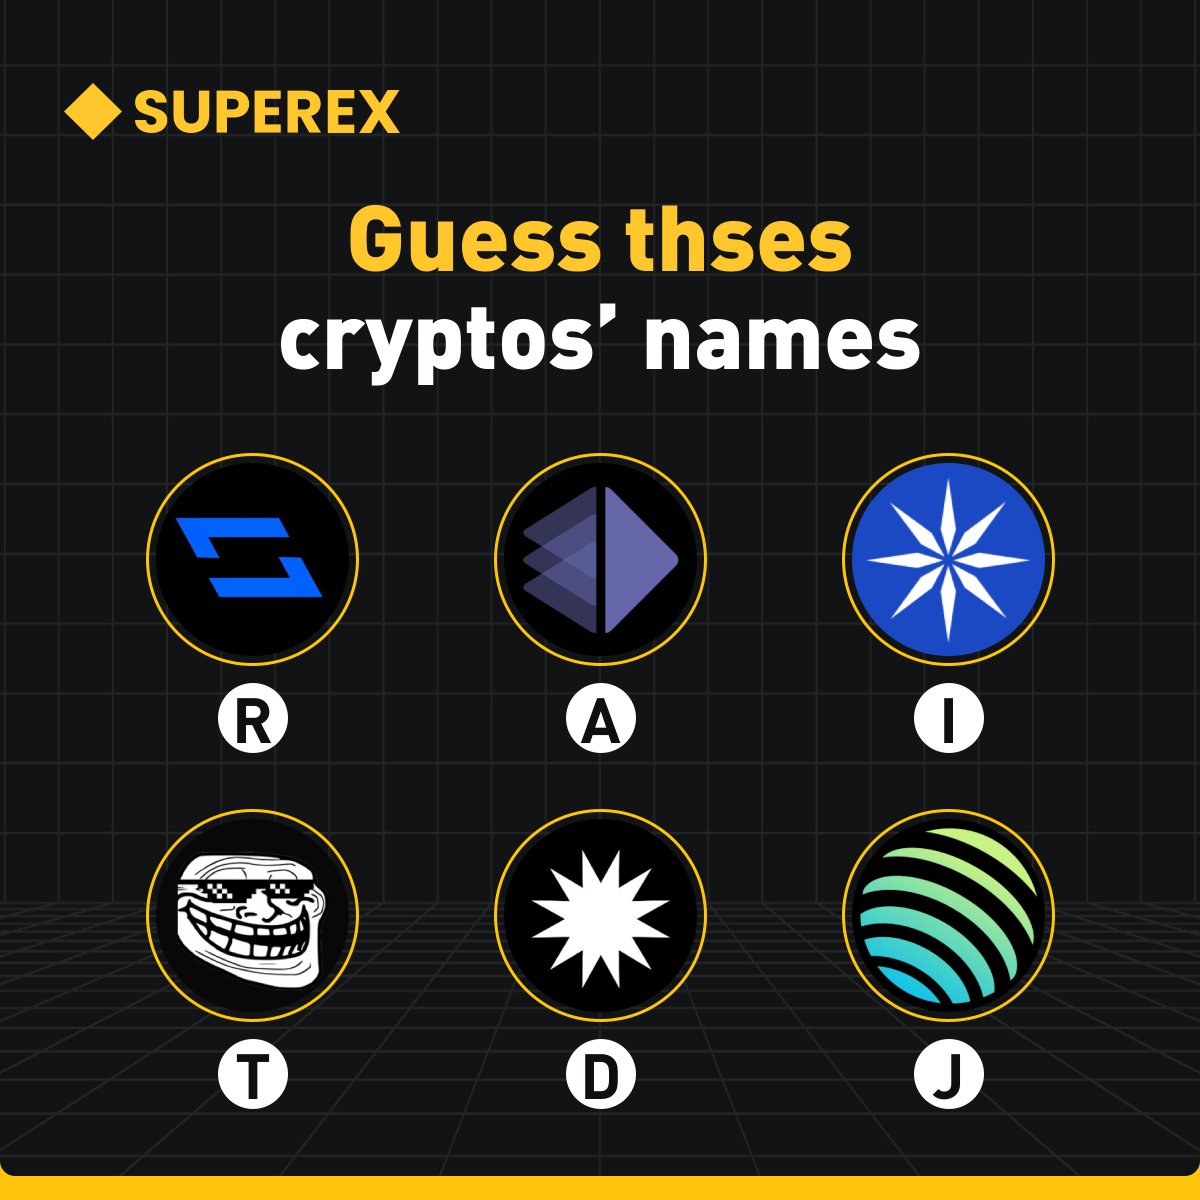 Guess these #crypto's names👀 $100 worth of futures trading fee coupons to #giveaway to 10 people! $10 coupon each.💰 1⃣Follow @SuperExet and @SuperexChinese 2⃣Comment your answers below & tag 3 friends